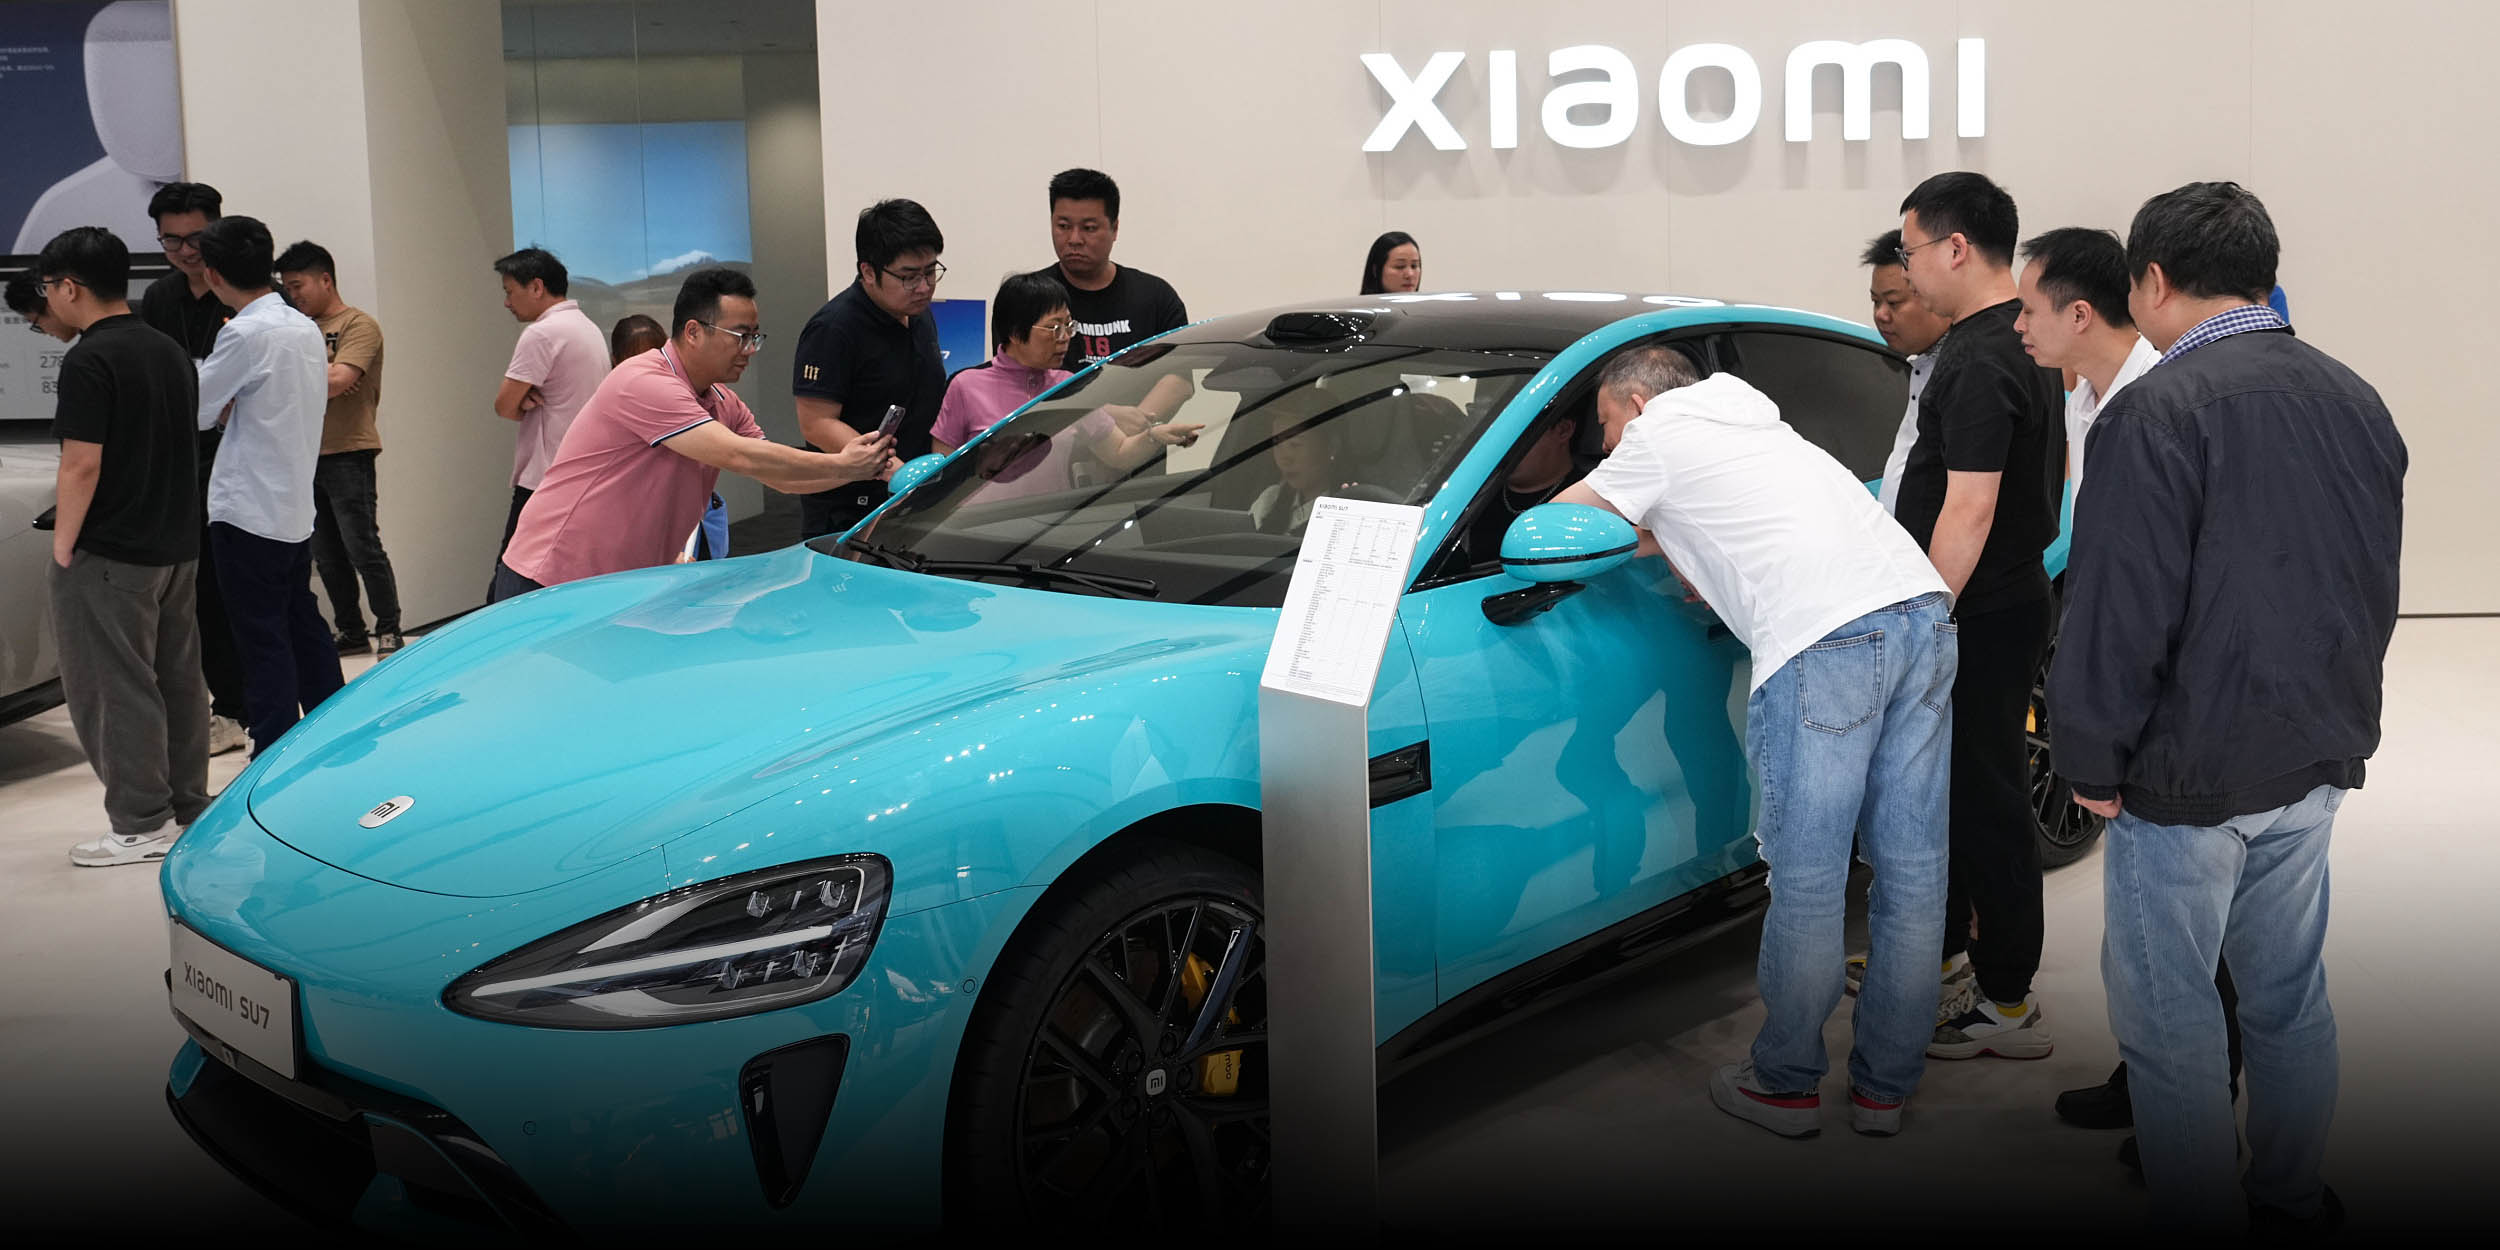 Xiaomi Enters China’s EV Race, Targets Tesla With Lower Pricing